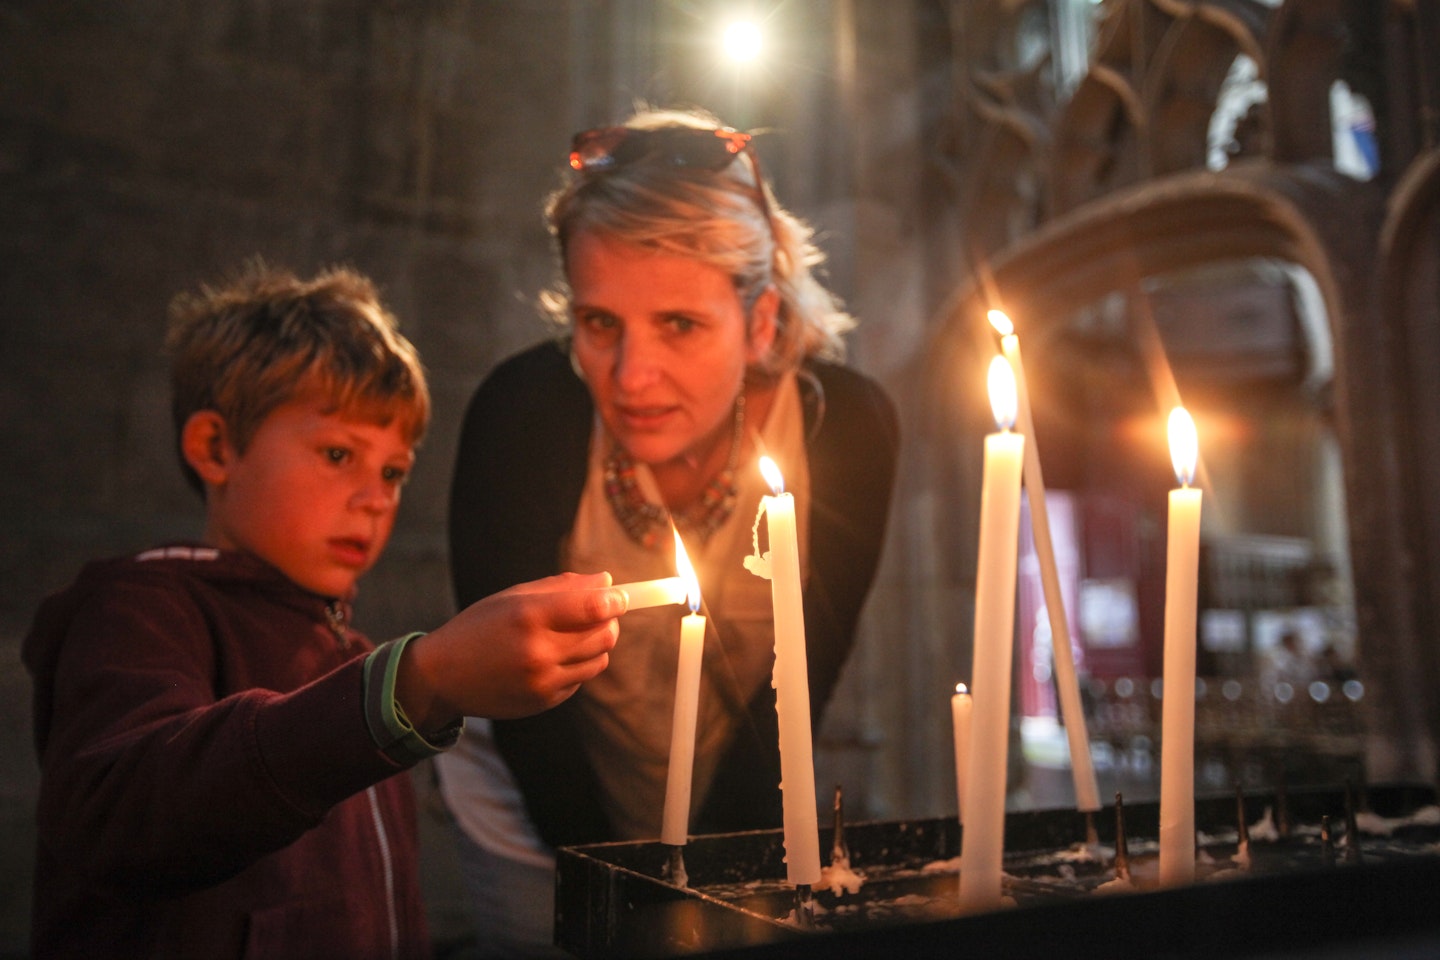 kid and lady lighting candles